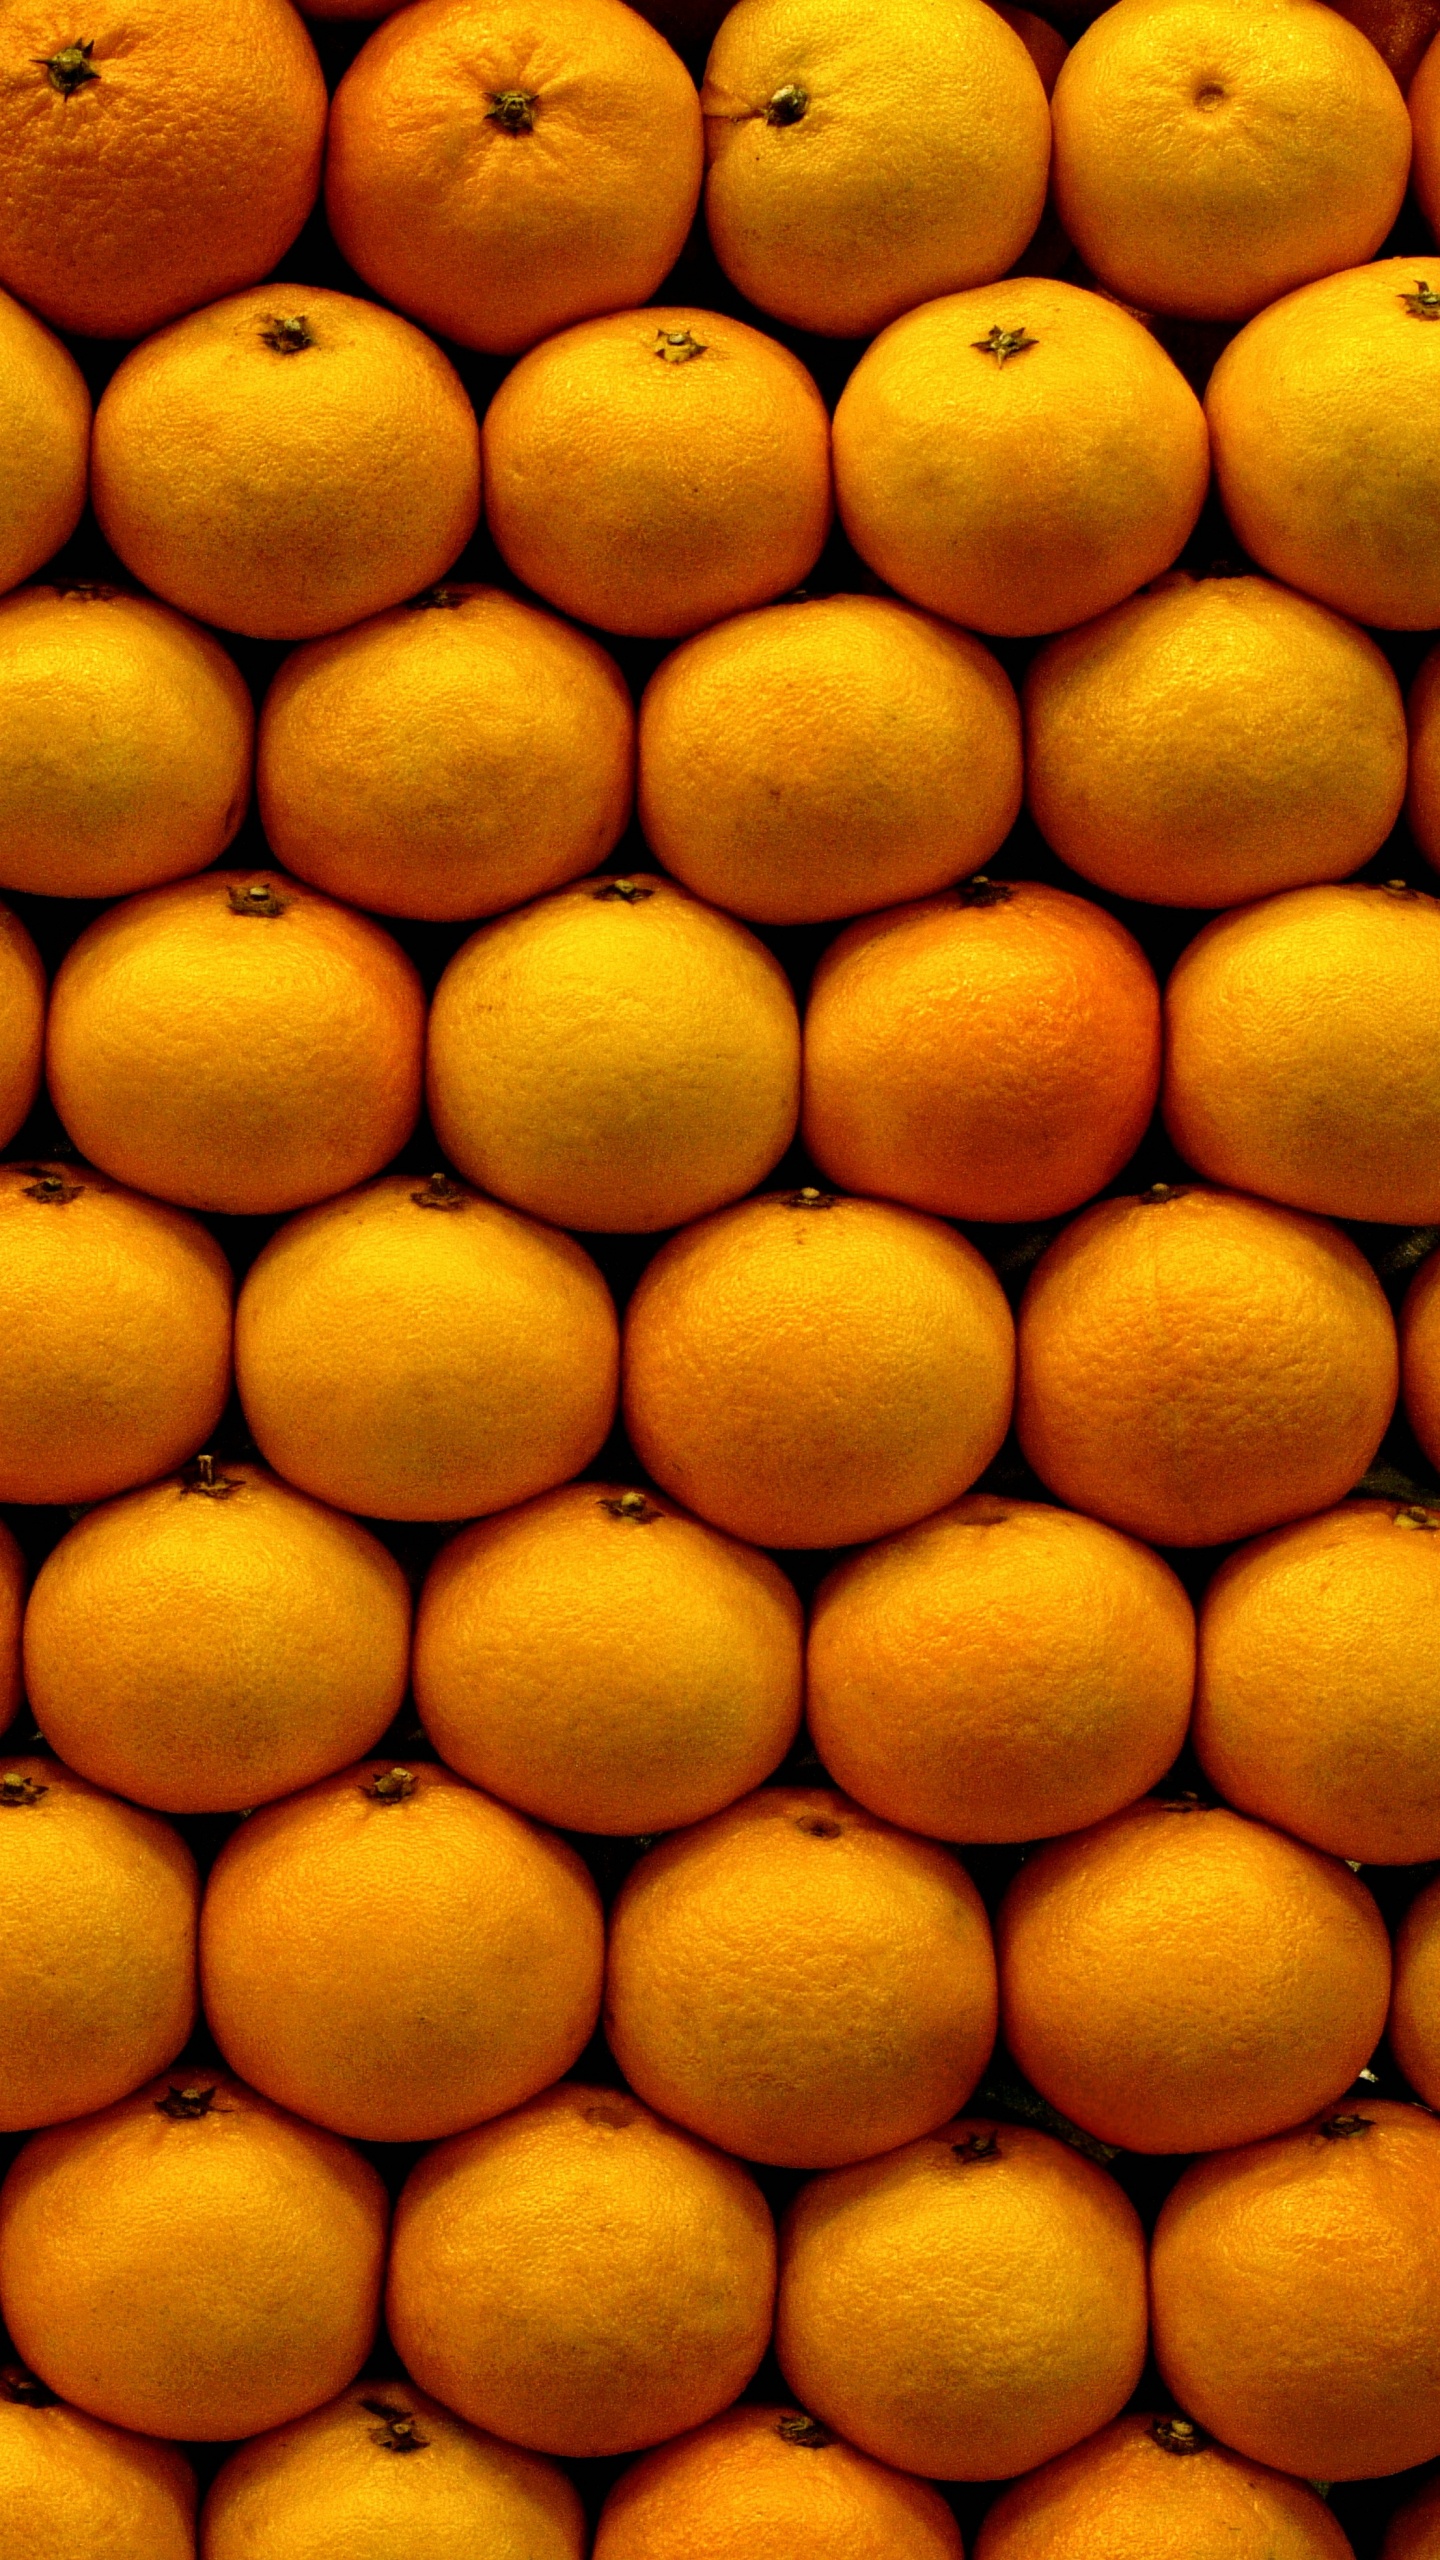 Yellow Round Fruits on White Surface. Wallpaper in 1440x2560 Resolution